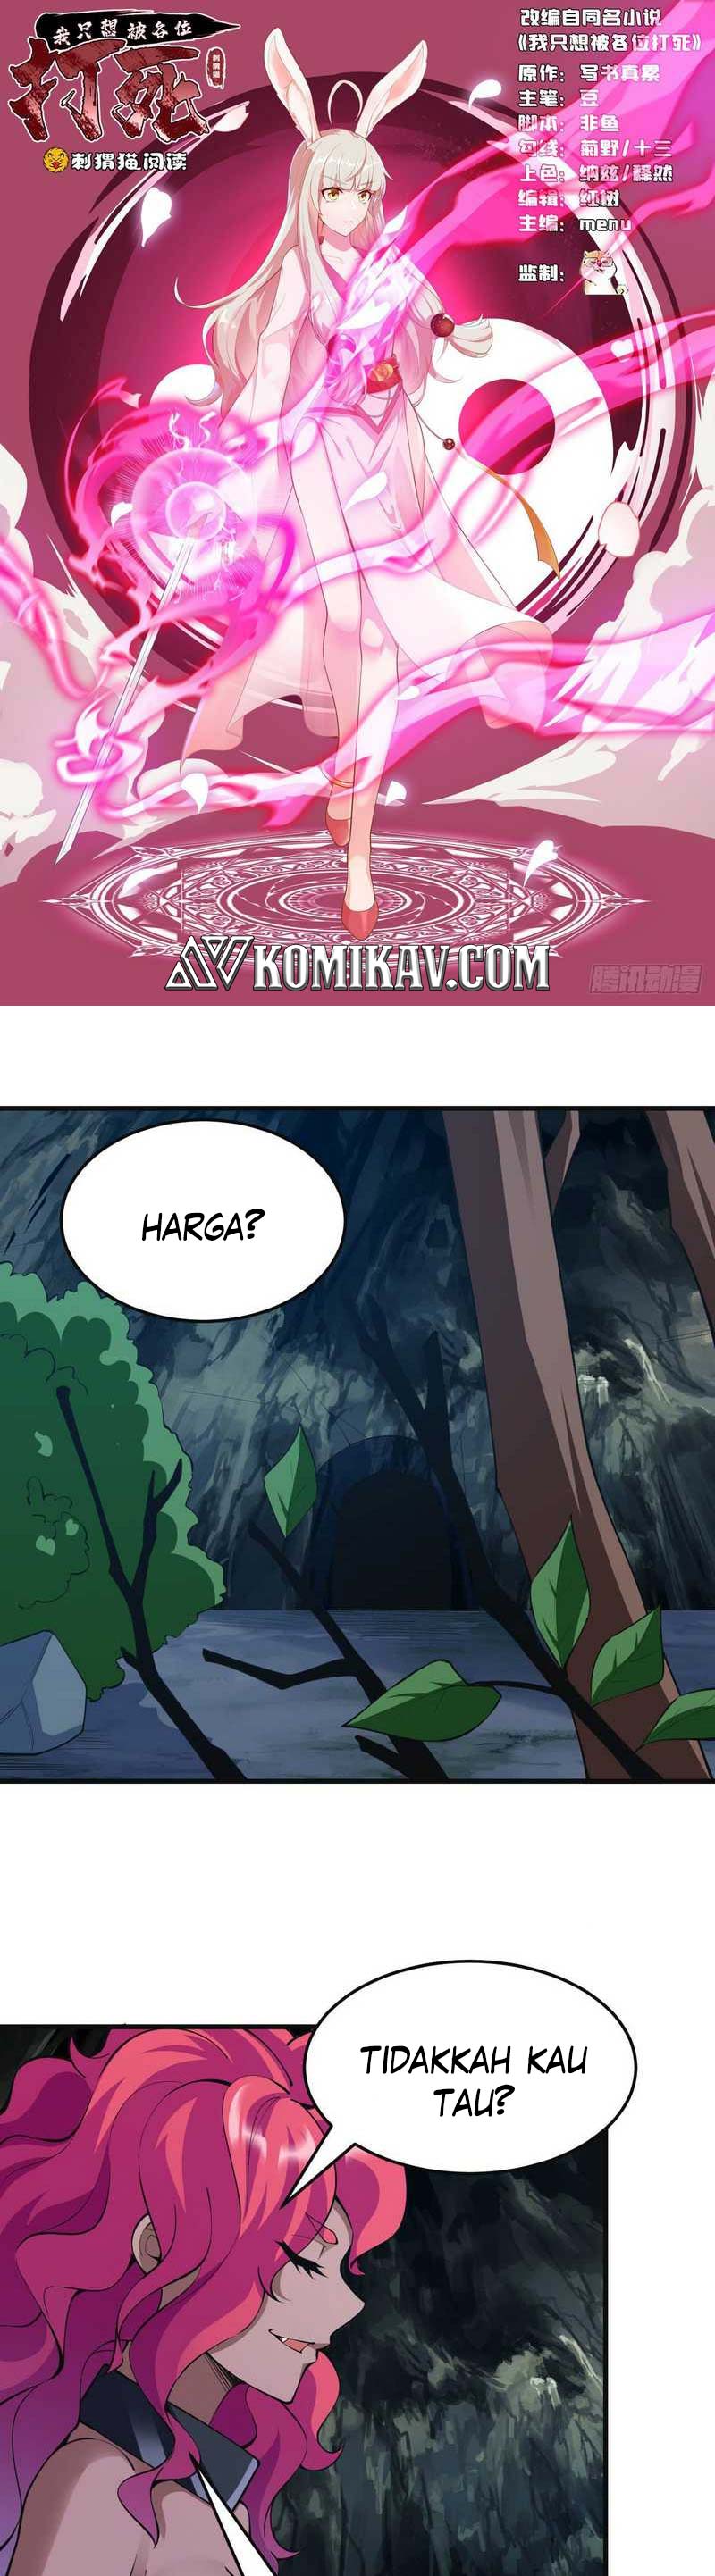 Dilarang COPAS - situs resmi www.mangacanblog.com - Komik i just want to be beaten to death by everyone 083 - chapter 83 84 Indonesia i just want to be beaten to death by everyone 083 - chapter 83 Terbaru 1|Baca Manga Komik Indonesia|Mangacan